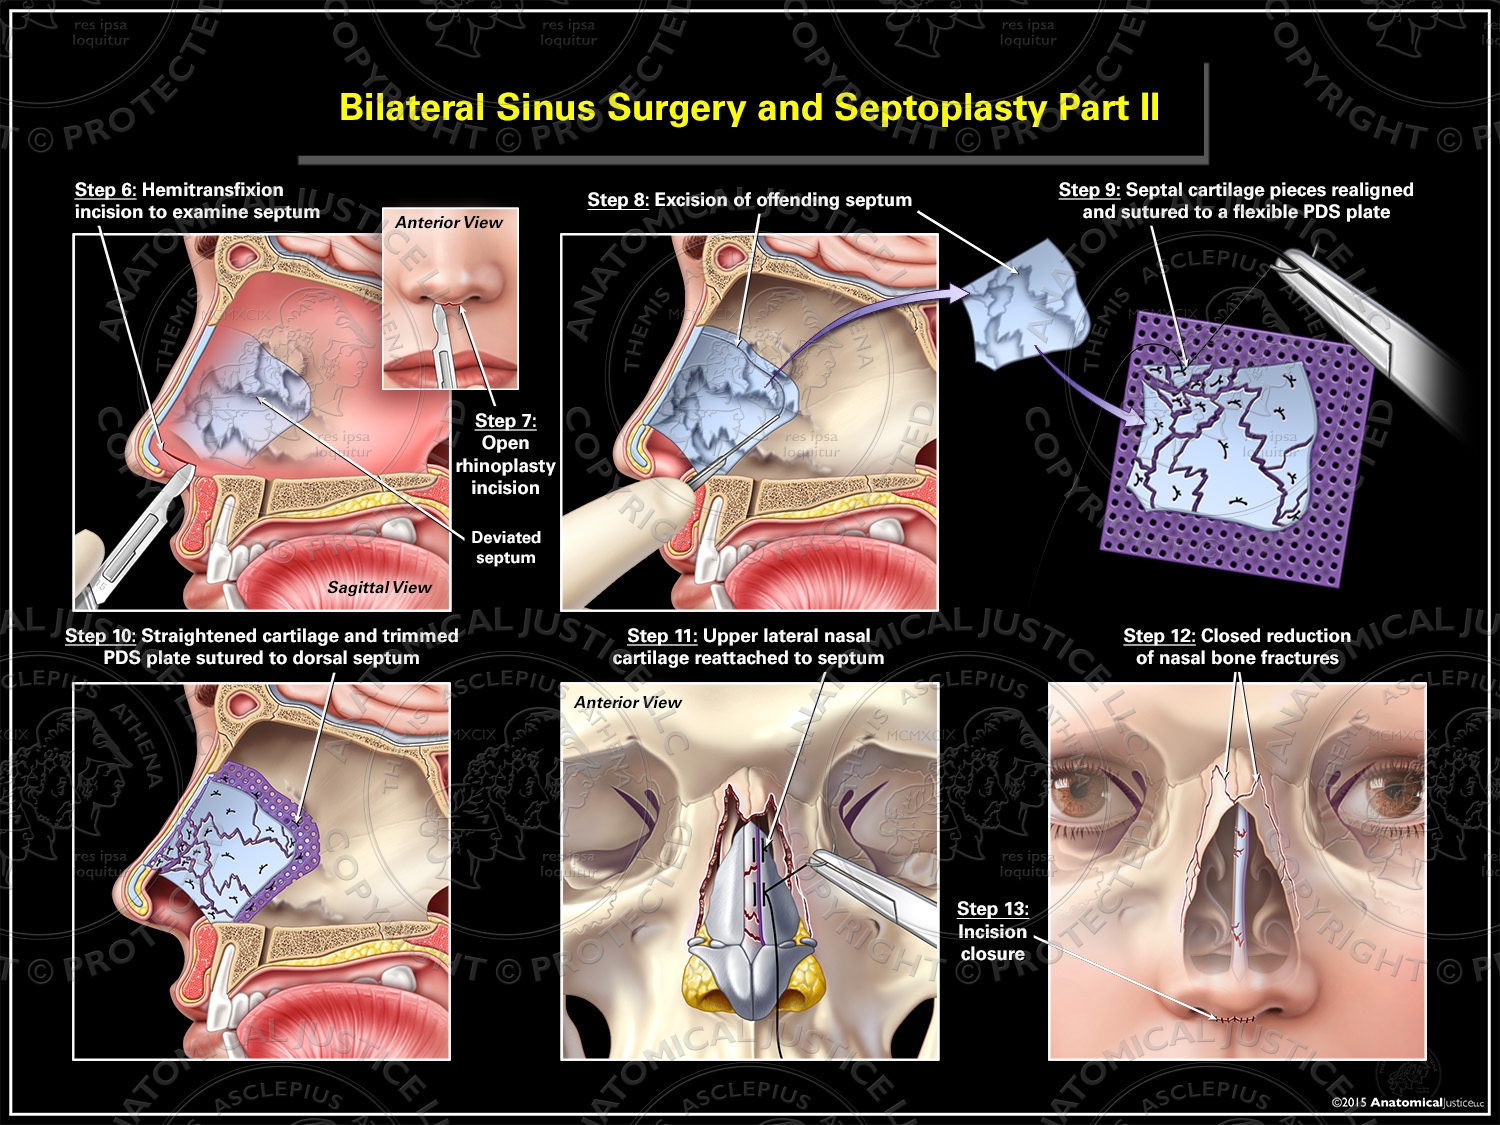 Six illustrations depict a septoplasty and closed reduction of nasal bone fractures.